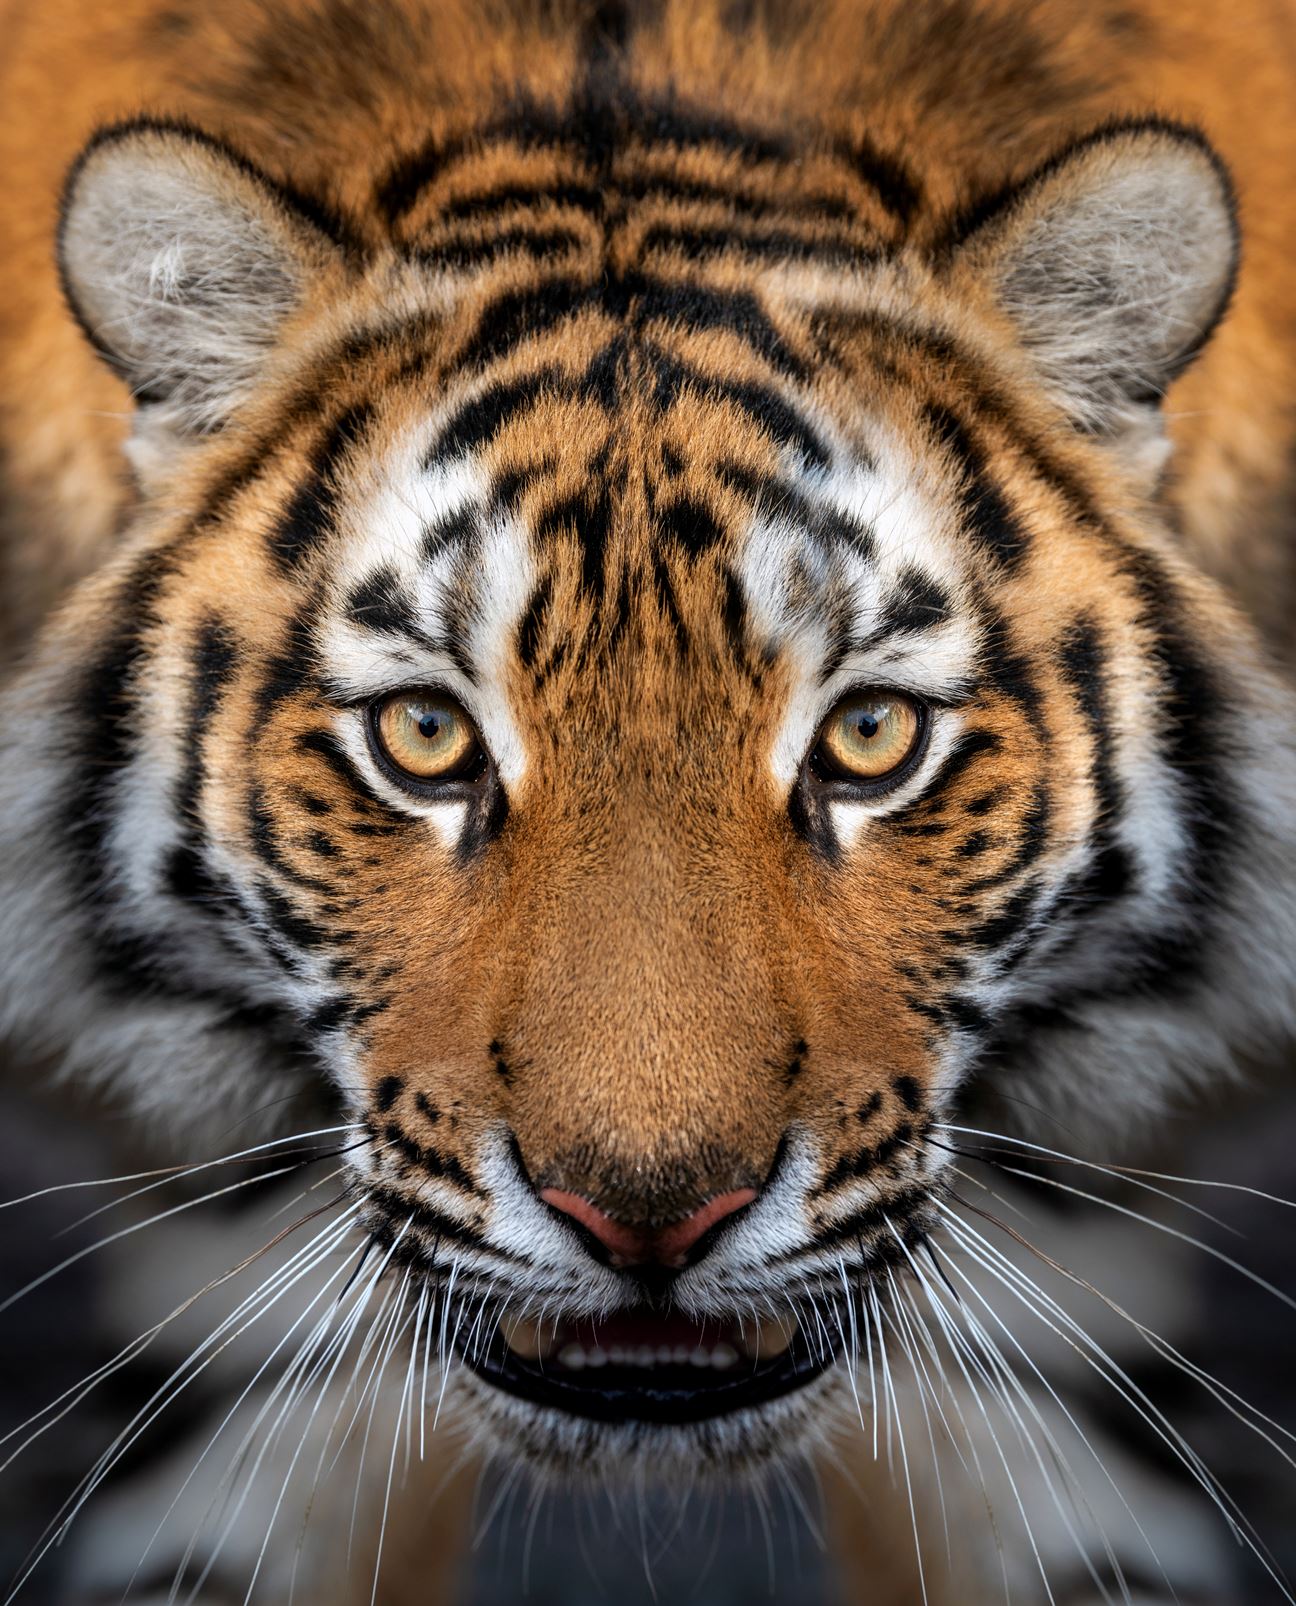 Jeevoka - Celebrate the International Tiger Day With These Fun Tiger Facts